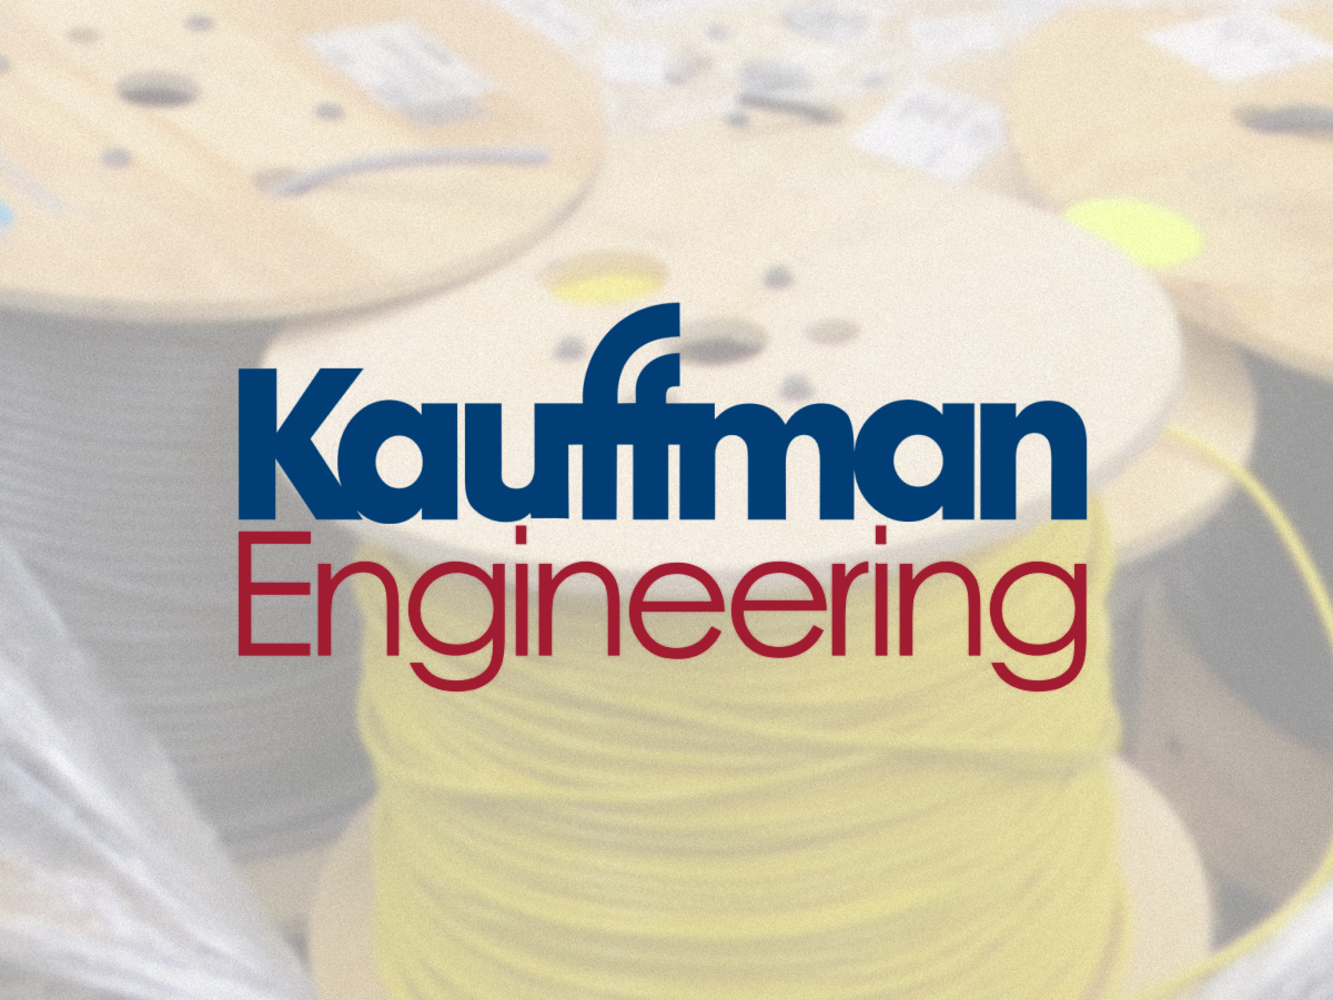 Wire Harness and Cable Assembly Manufacturing Equipment – surplus to ongoing operations of Kauffman Engineering